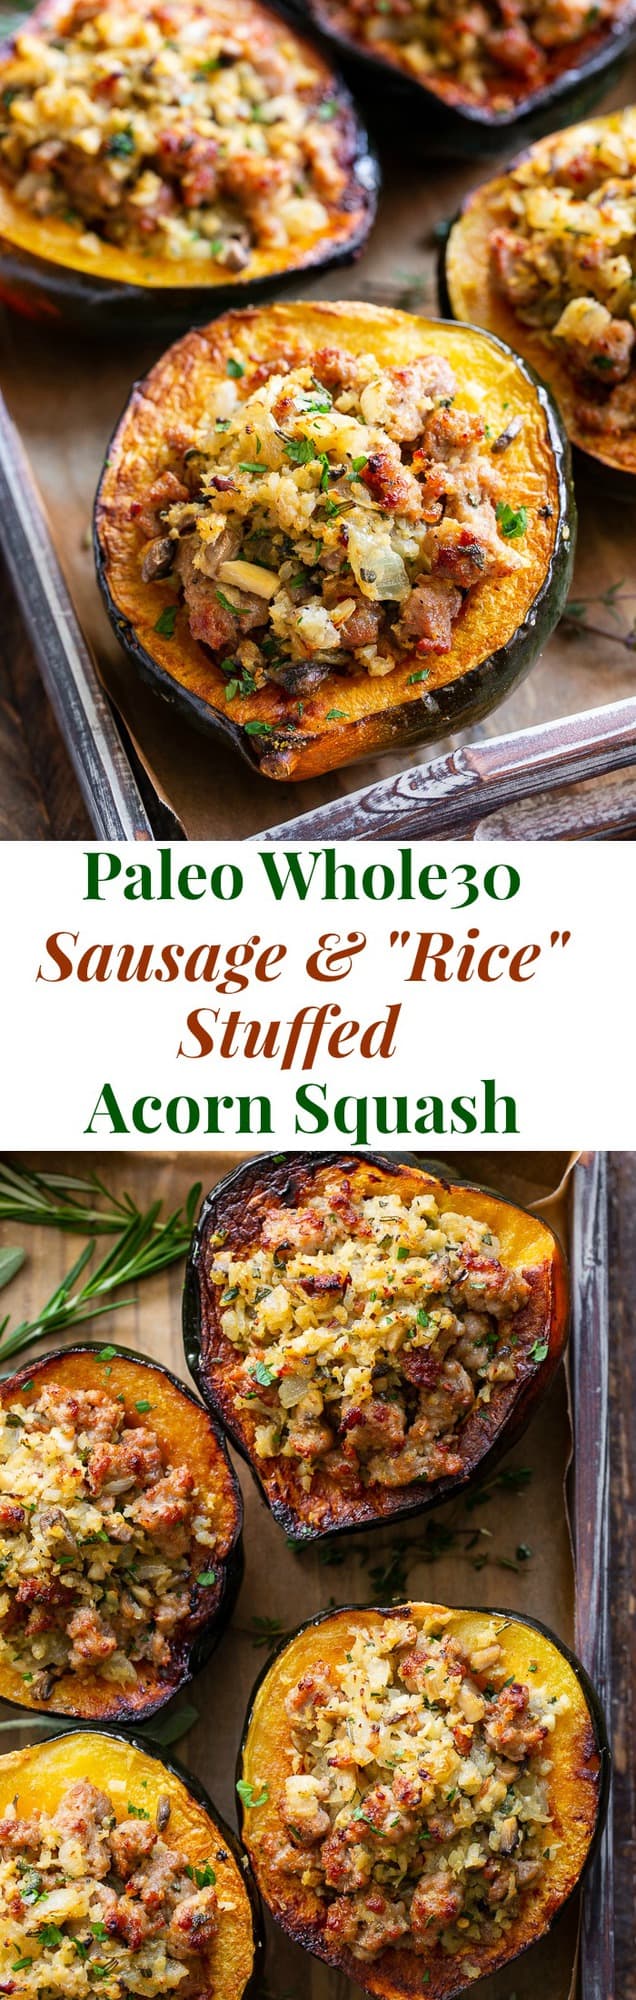 This savory stuffed acorn squash is so delicious it’s addicting!  A sausage and cauliflower rice stuffing is seasoned with lots of fresh herbs and served toasty in roasted acorn squash bowls.  Perfect as a holiday side dish or an anytime meal.  Paleo, Whole30, and low in carbs.